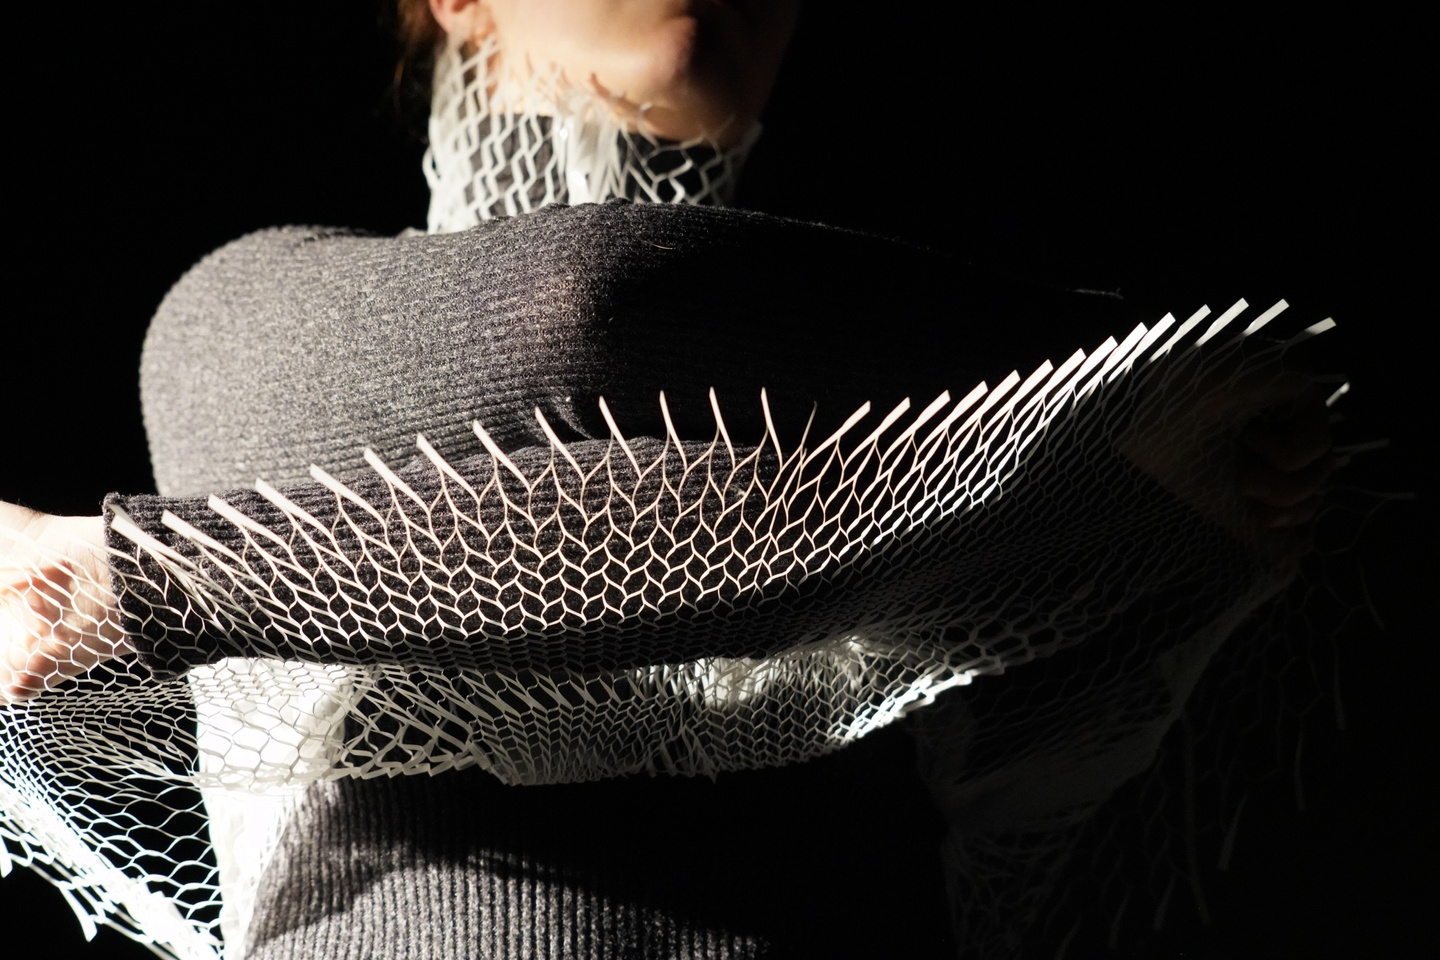 View of a person's torso wearing a grey turtleneck grabbing the bottom edges of a white 3D printed mesh shirt and lifting it up as if to take it off.